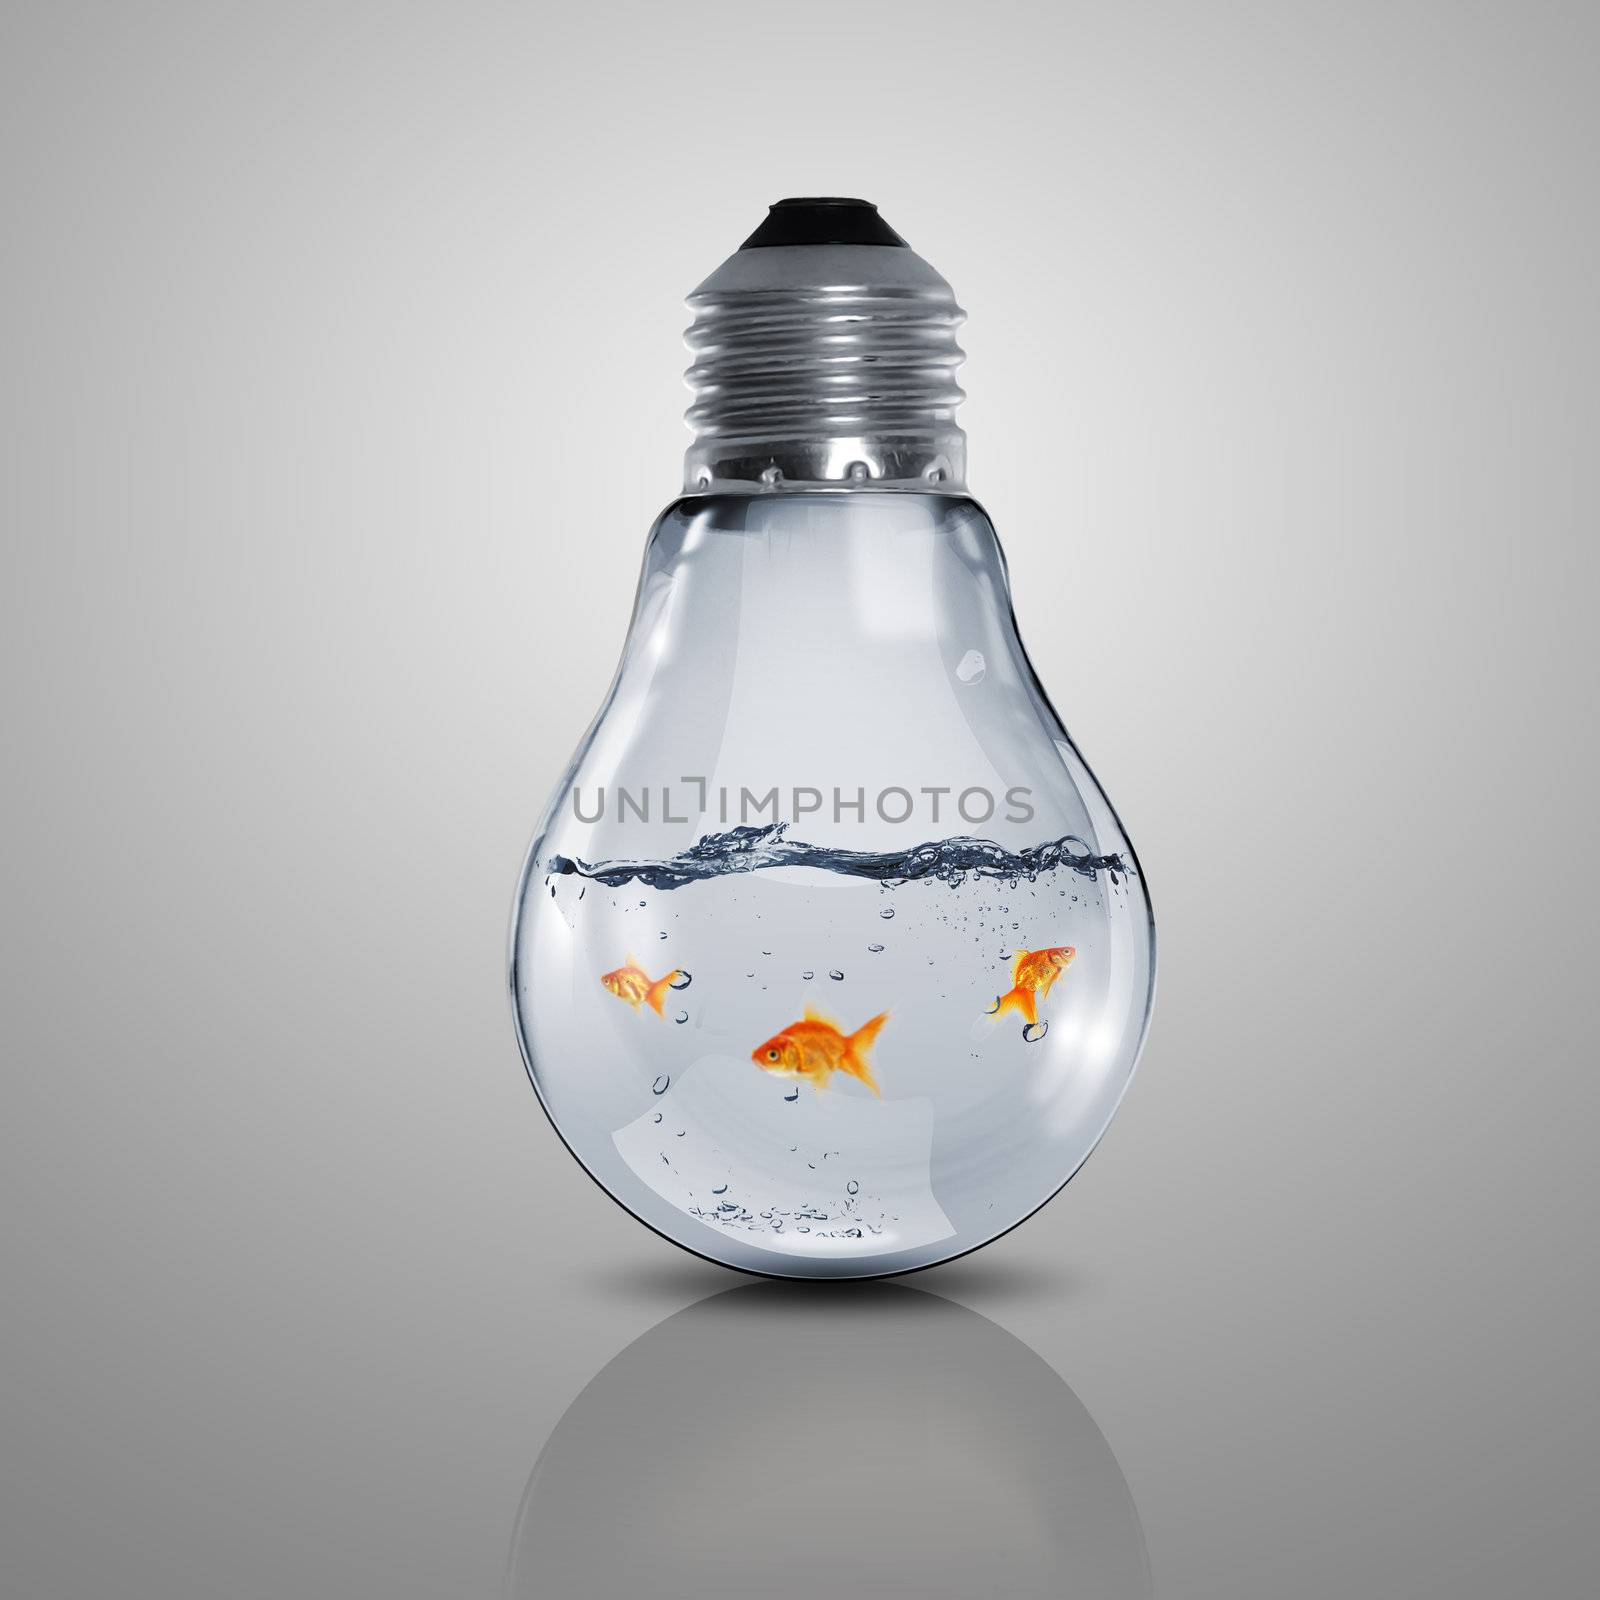 Gold fish inside an electric bulb by sergey_nivens